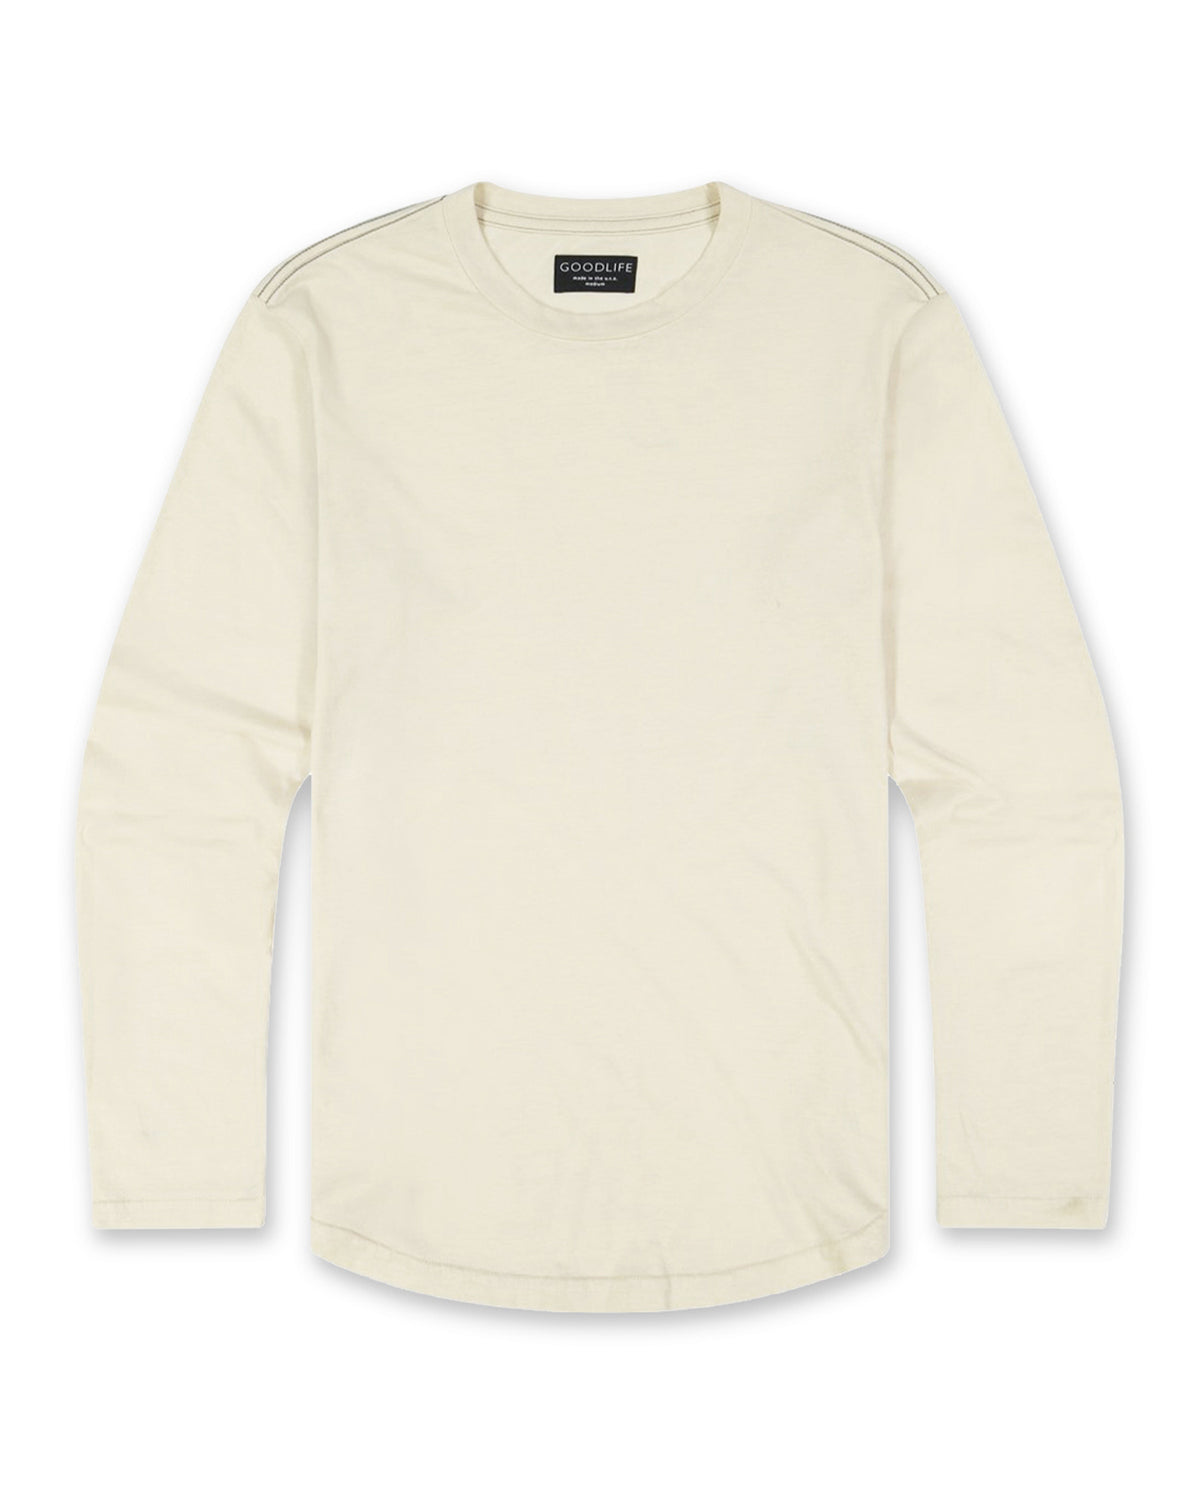 Tri-Blend Long Sleeve Scallop Crew - Seed